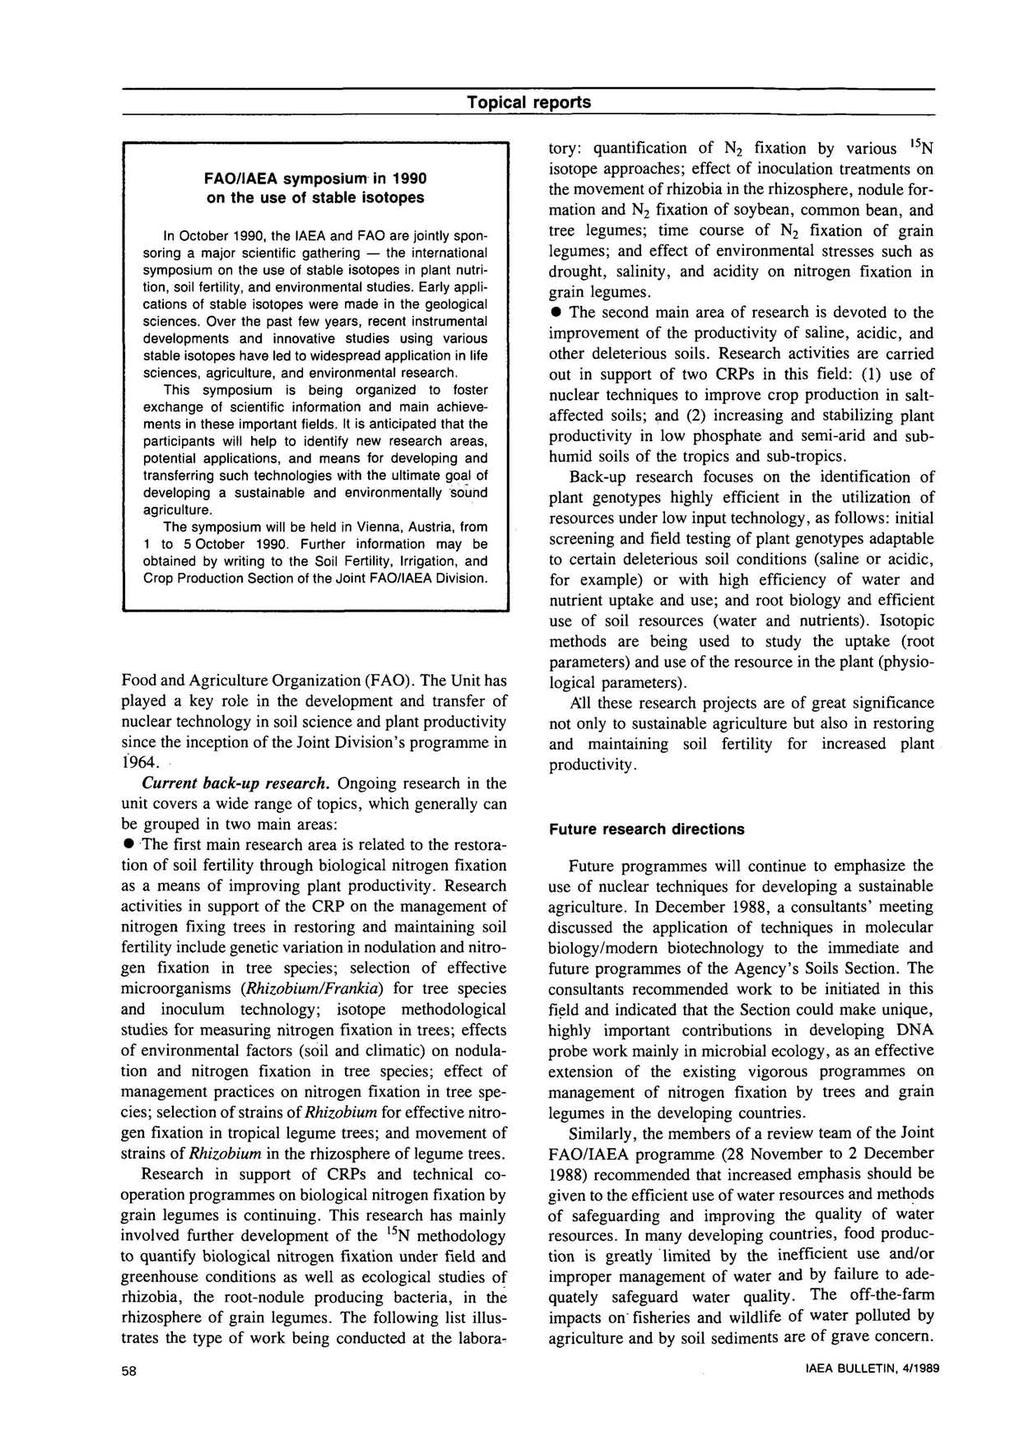 FAO/IAEA symposium in 1990 on the use of stable isotopes In October 1990, the IAEA and FAO are jointly sponsoring a major scientific gathering the international symposium on the use of stable